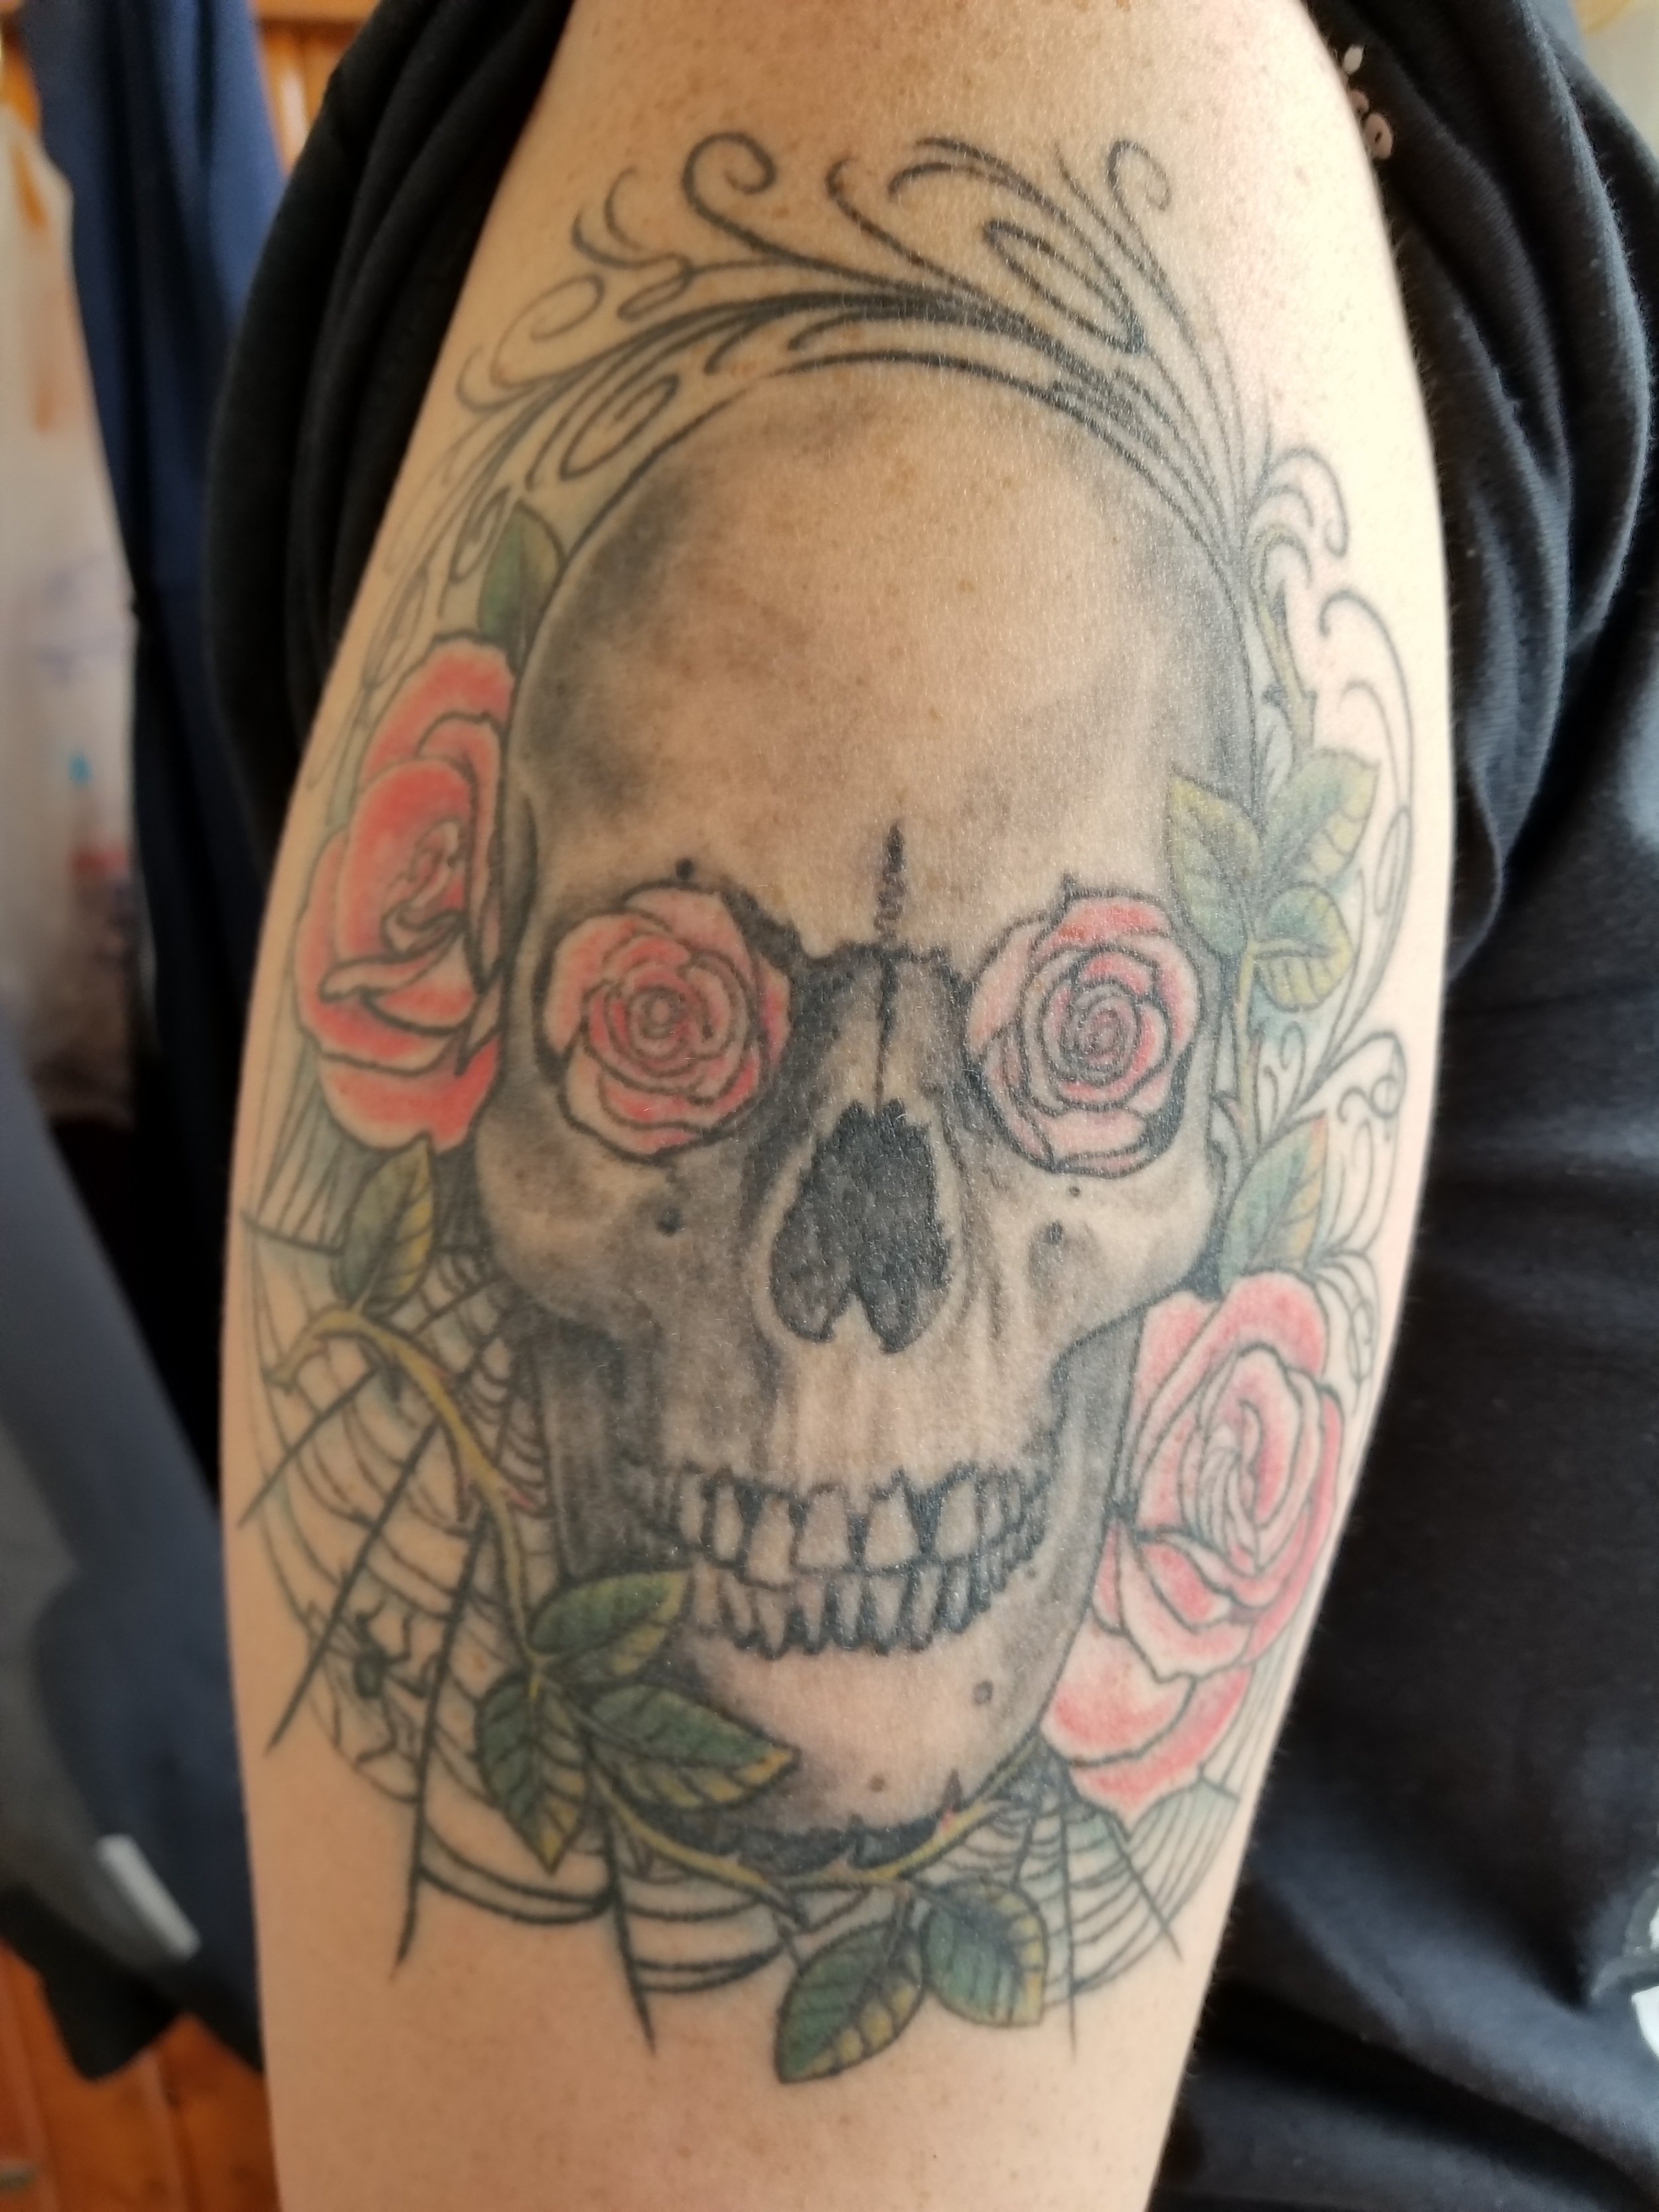 Skull, roses and spider web